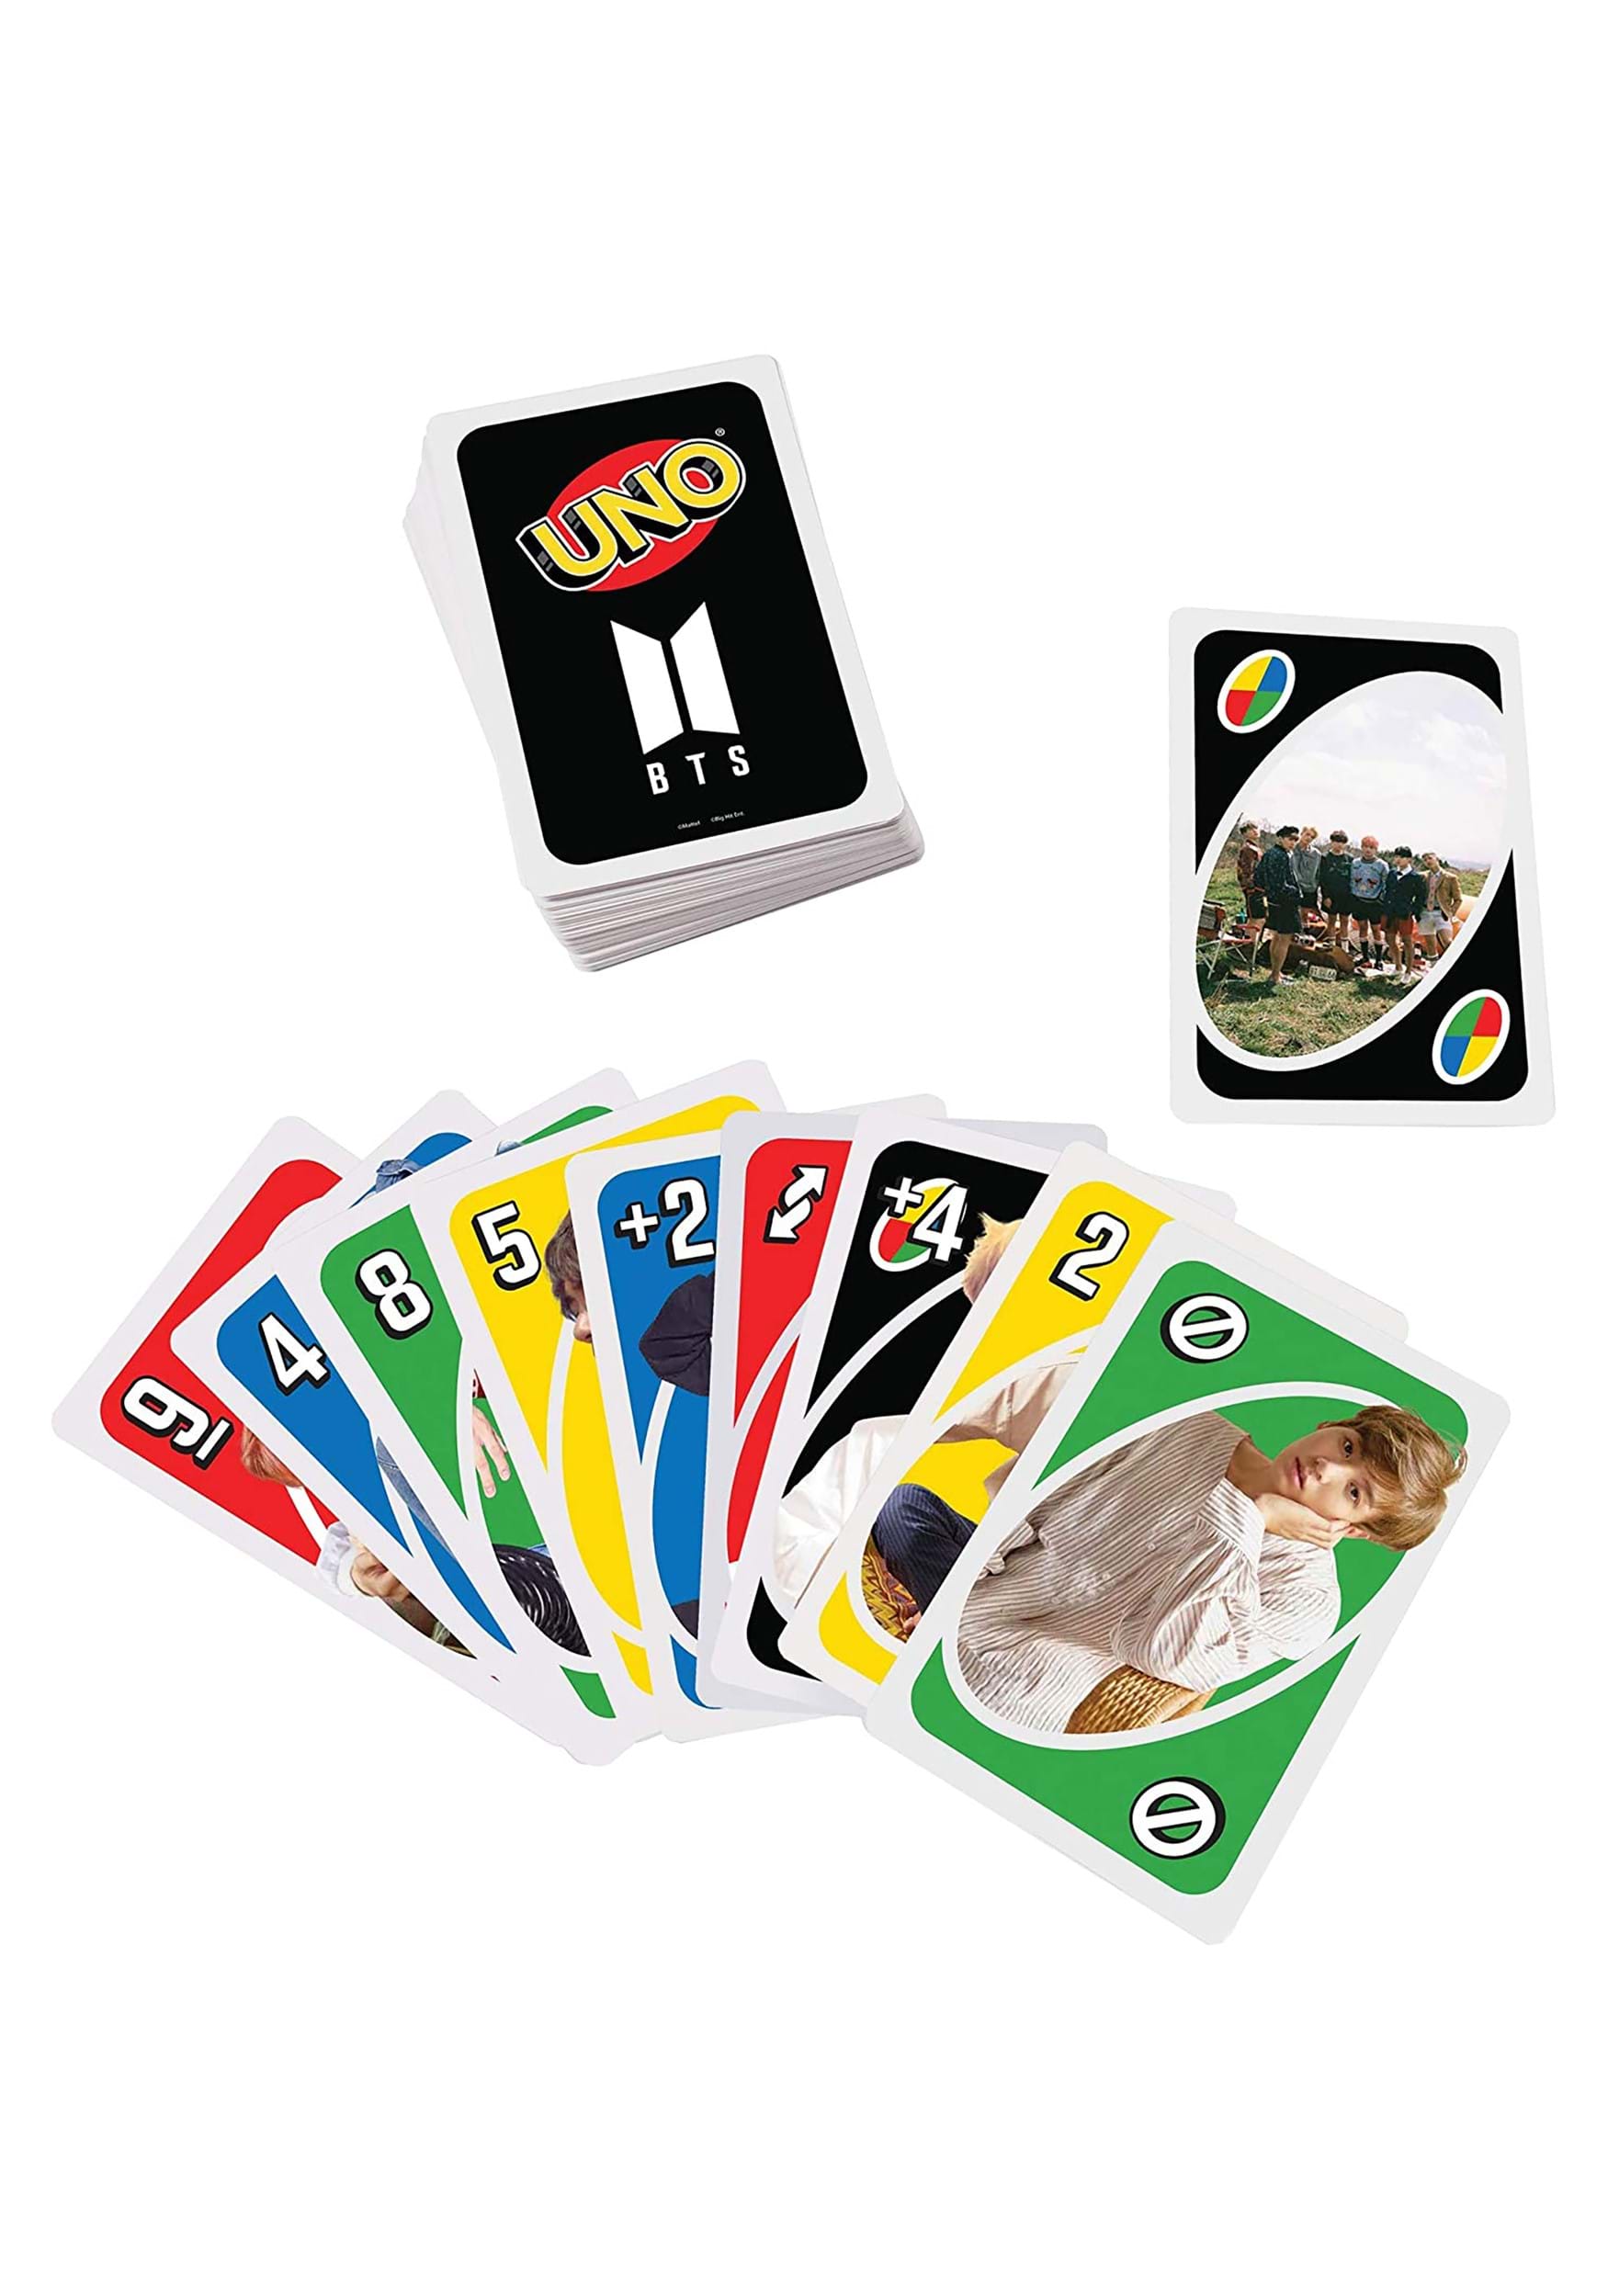 Giant UNO Card Game